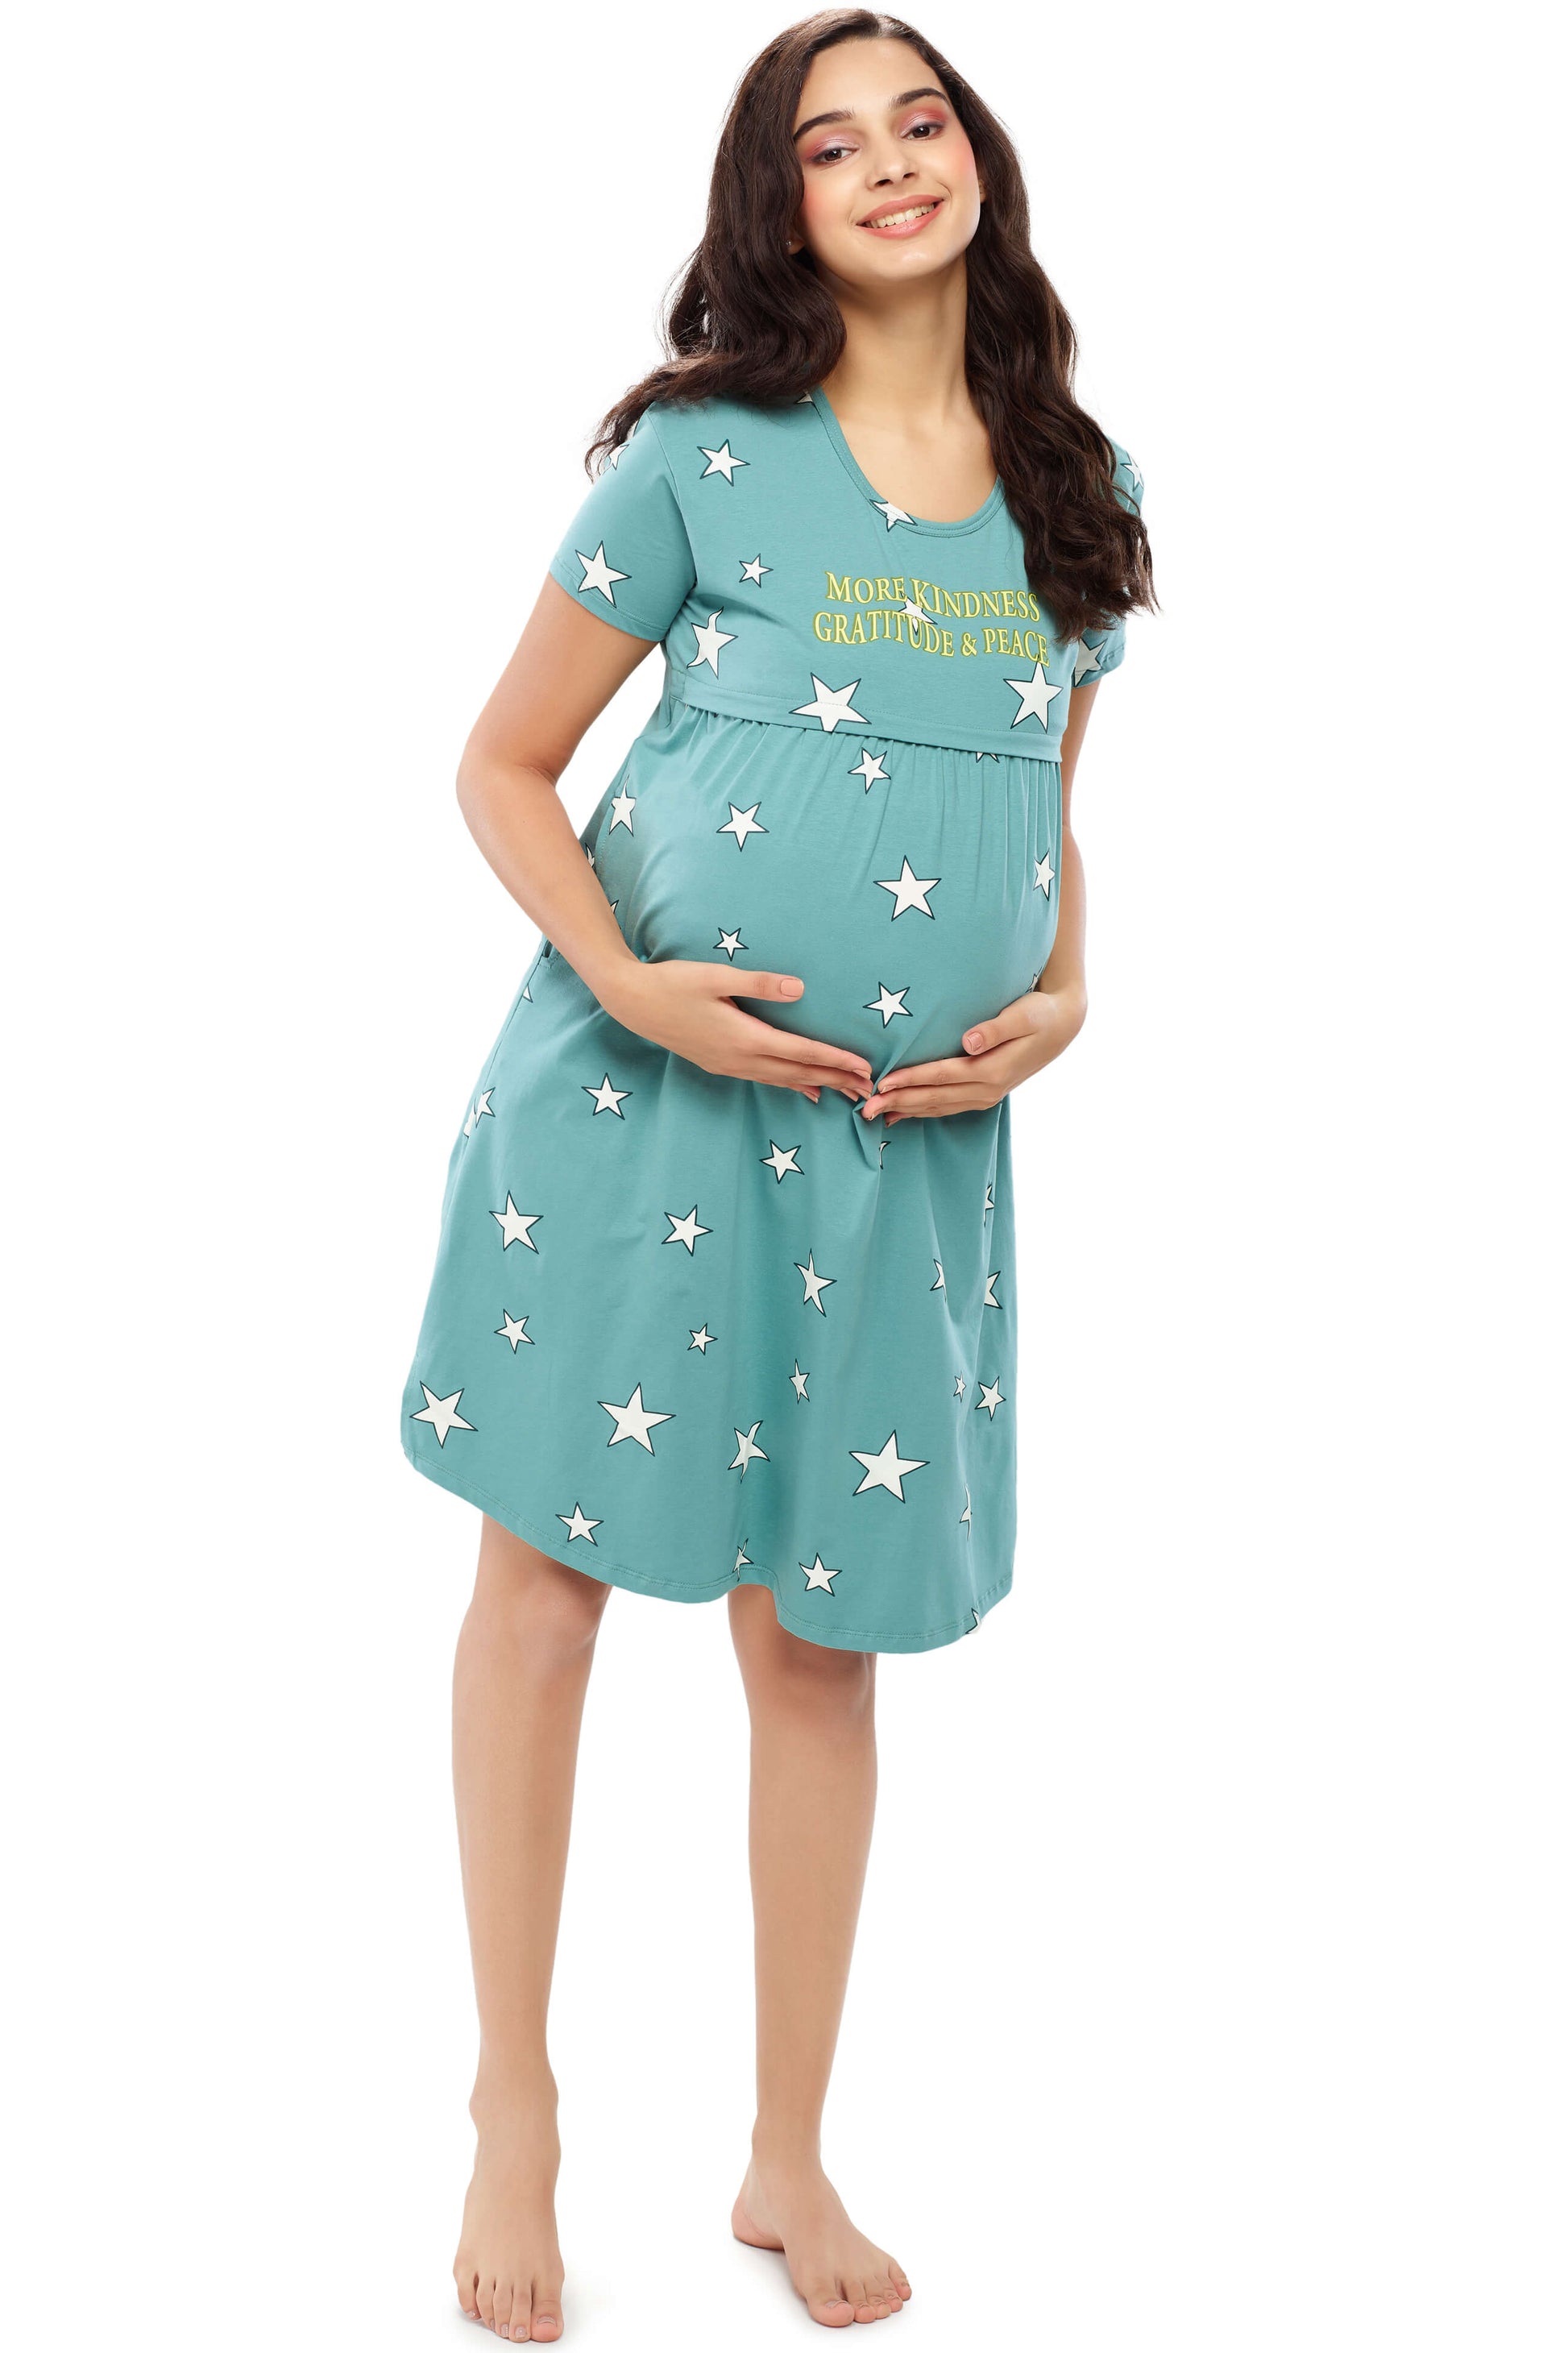 Buy Women's Pure Cotton Printed Maternity Feeding Nighty Gown (M